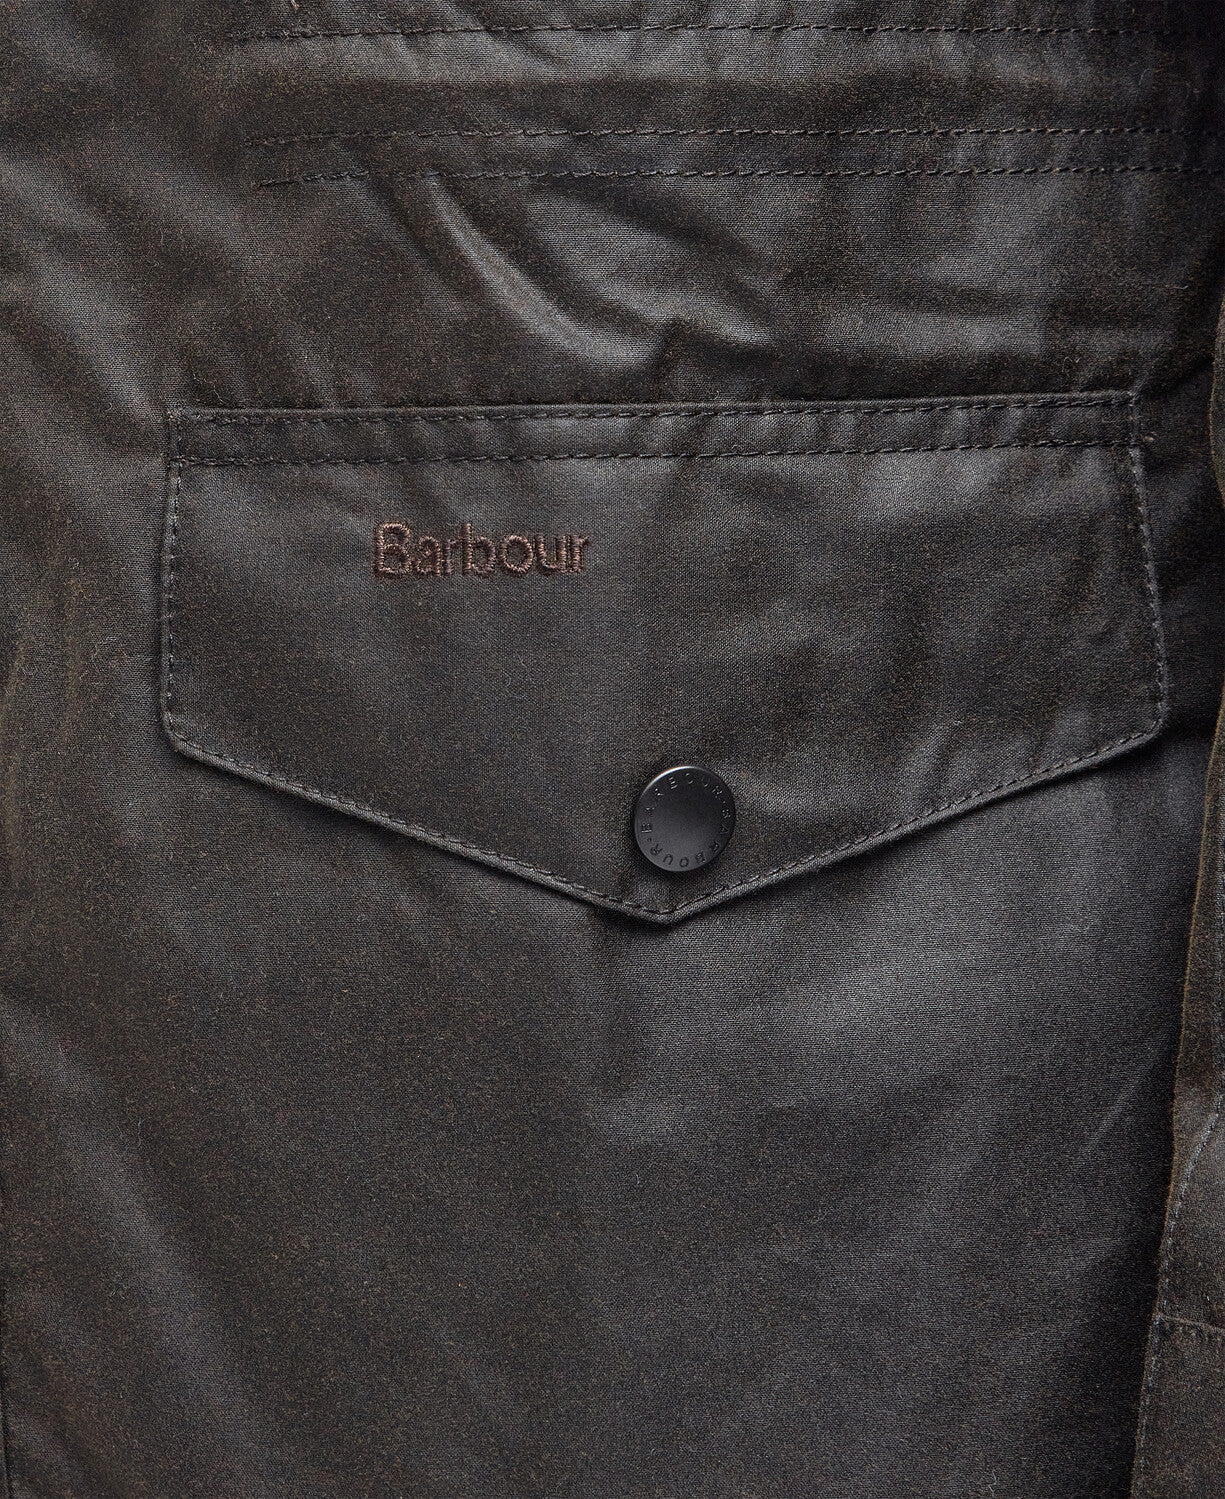 Barbour Sapper Waxed Jacket